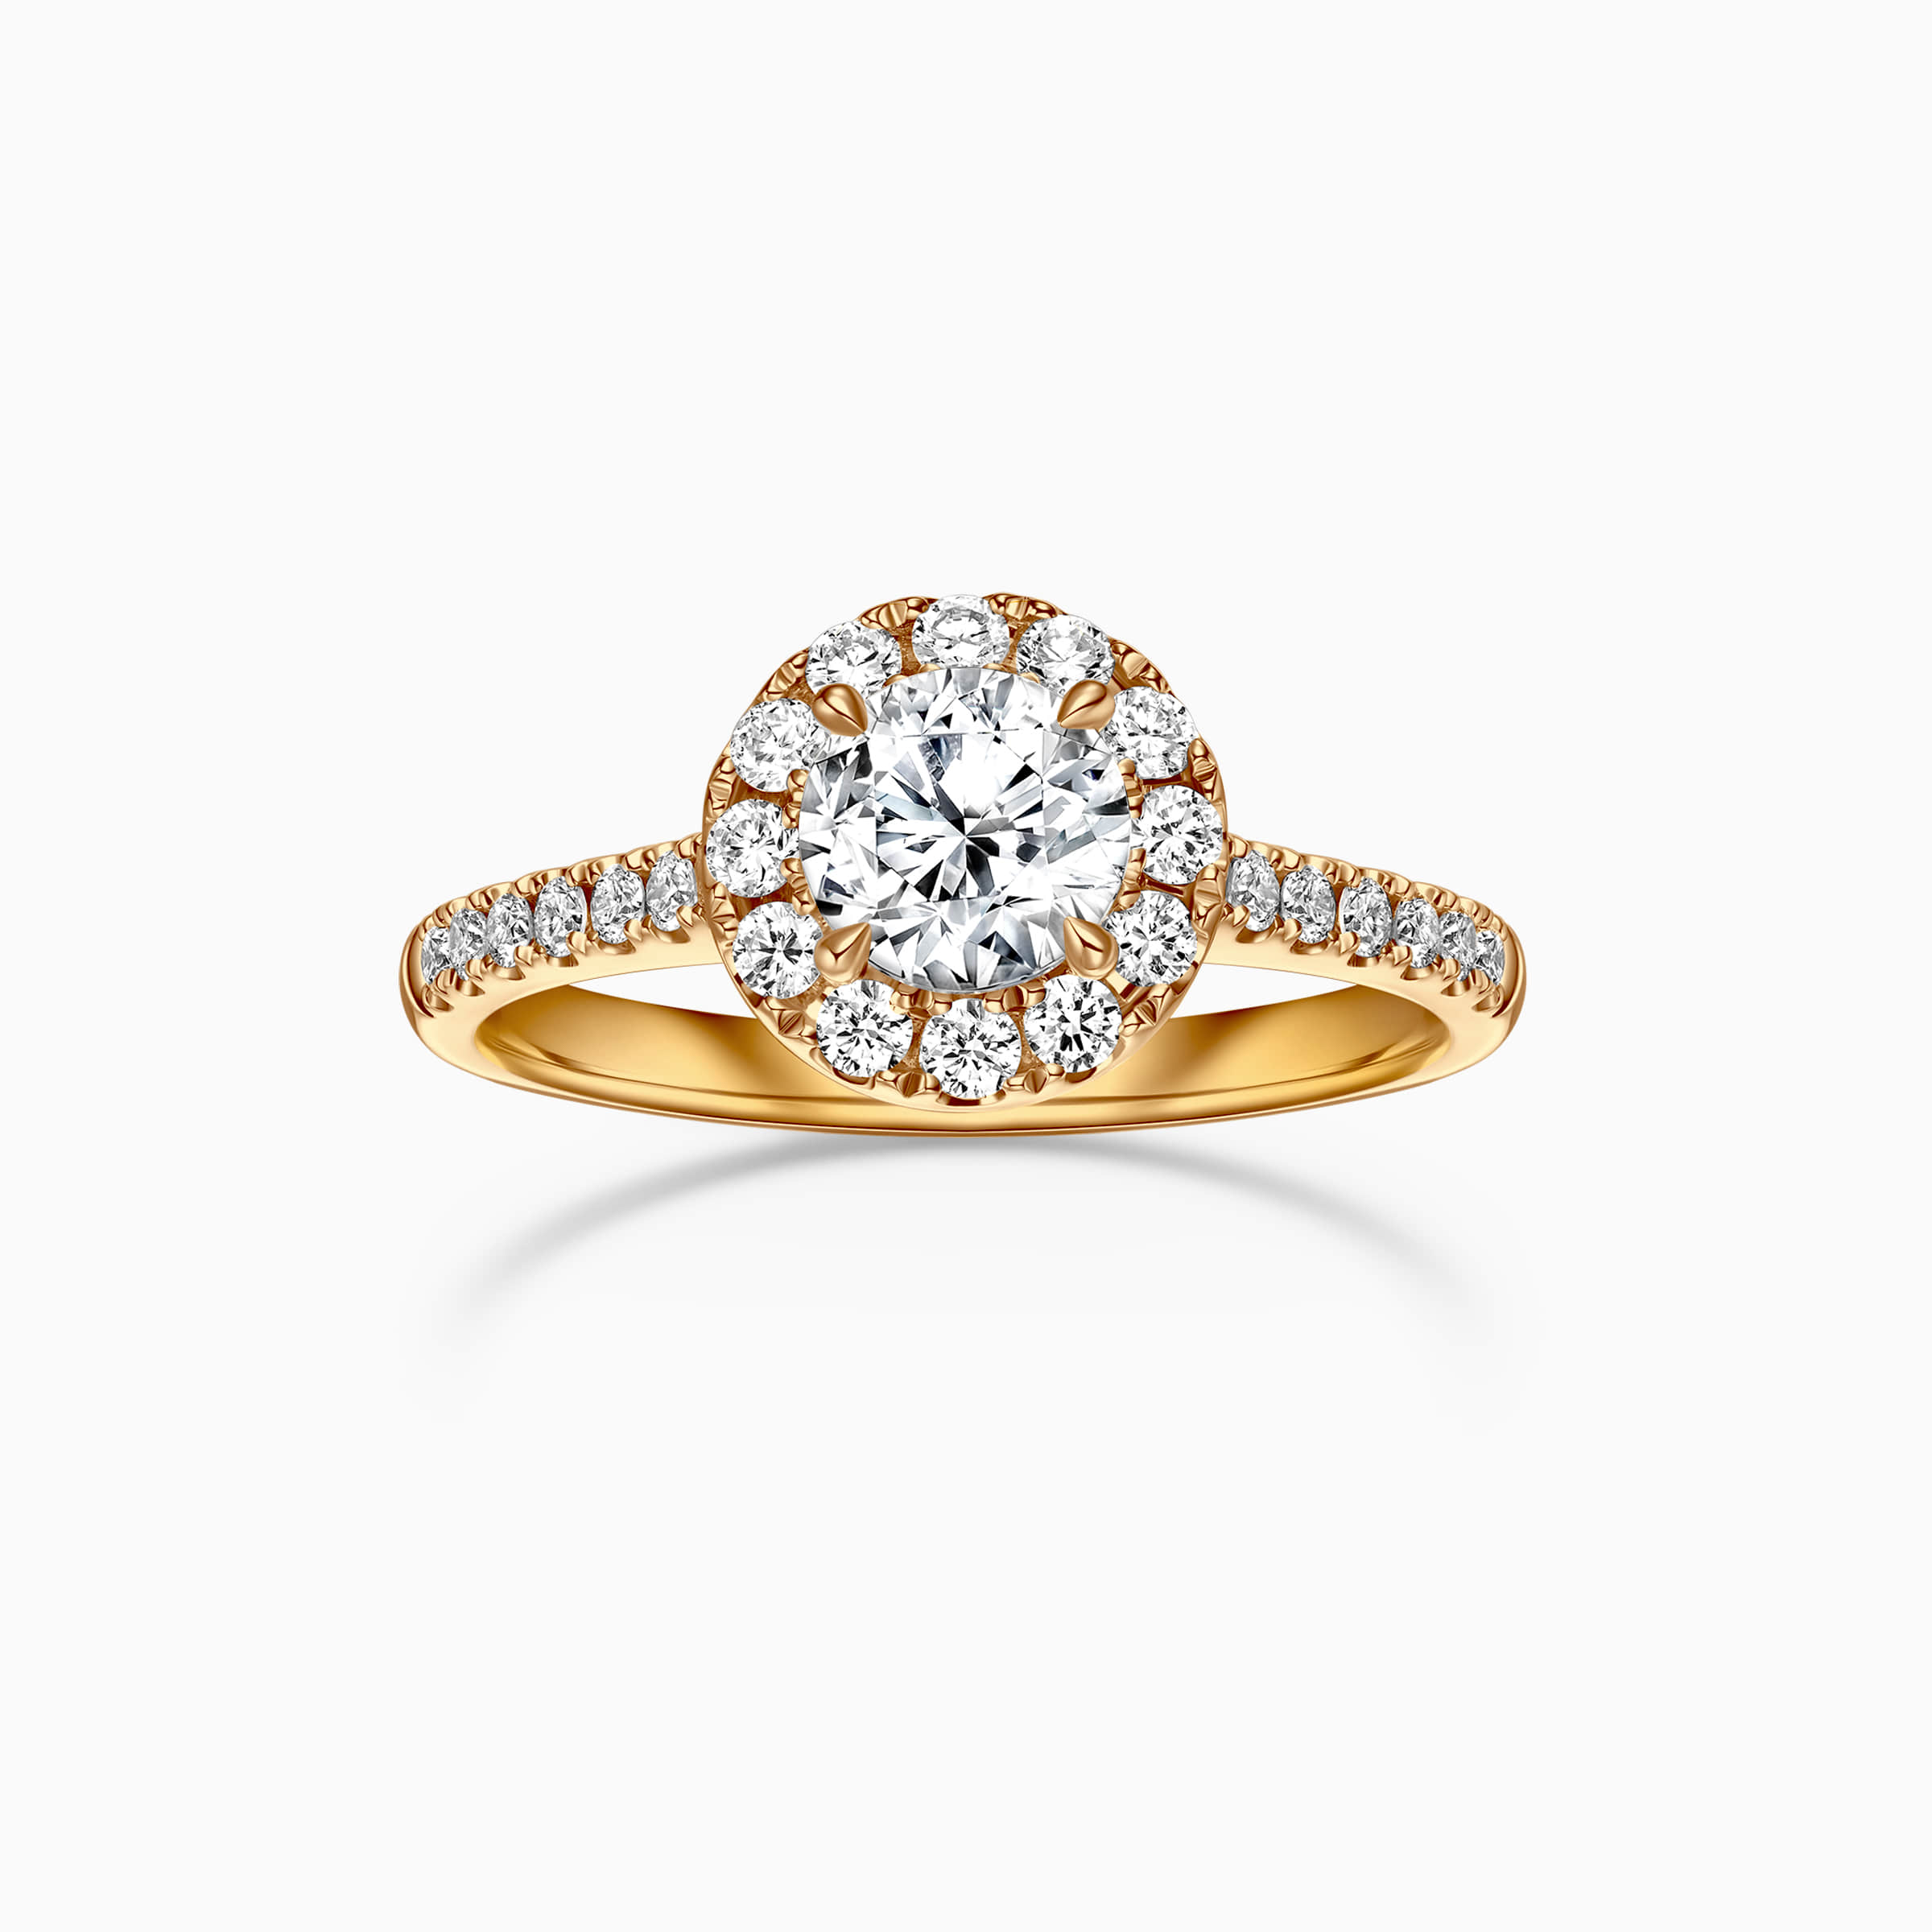 Darry Ring round halo engagement ring yellow gold